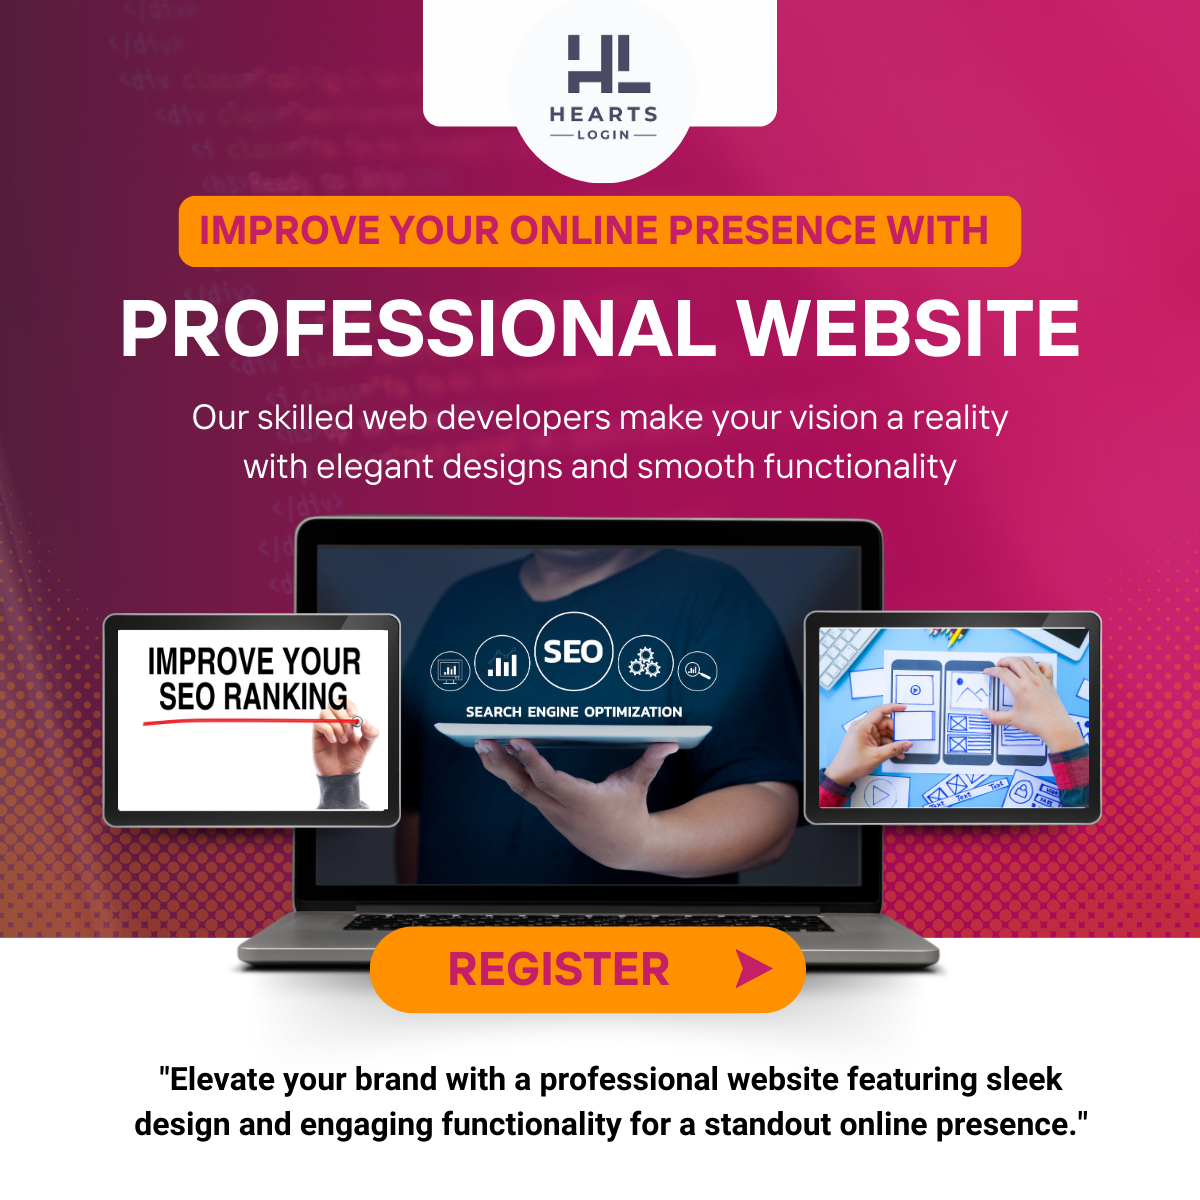 Hearts Login: Website Design For Professional Business | Increase Business Sales 10x | Attract More Customers!